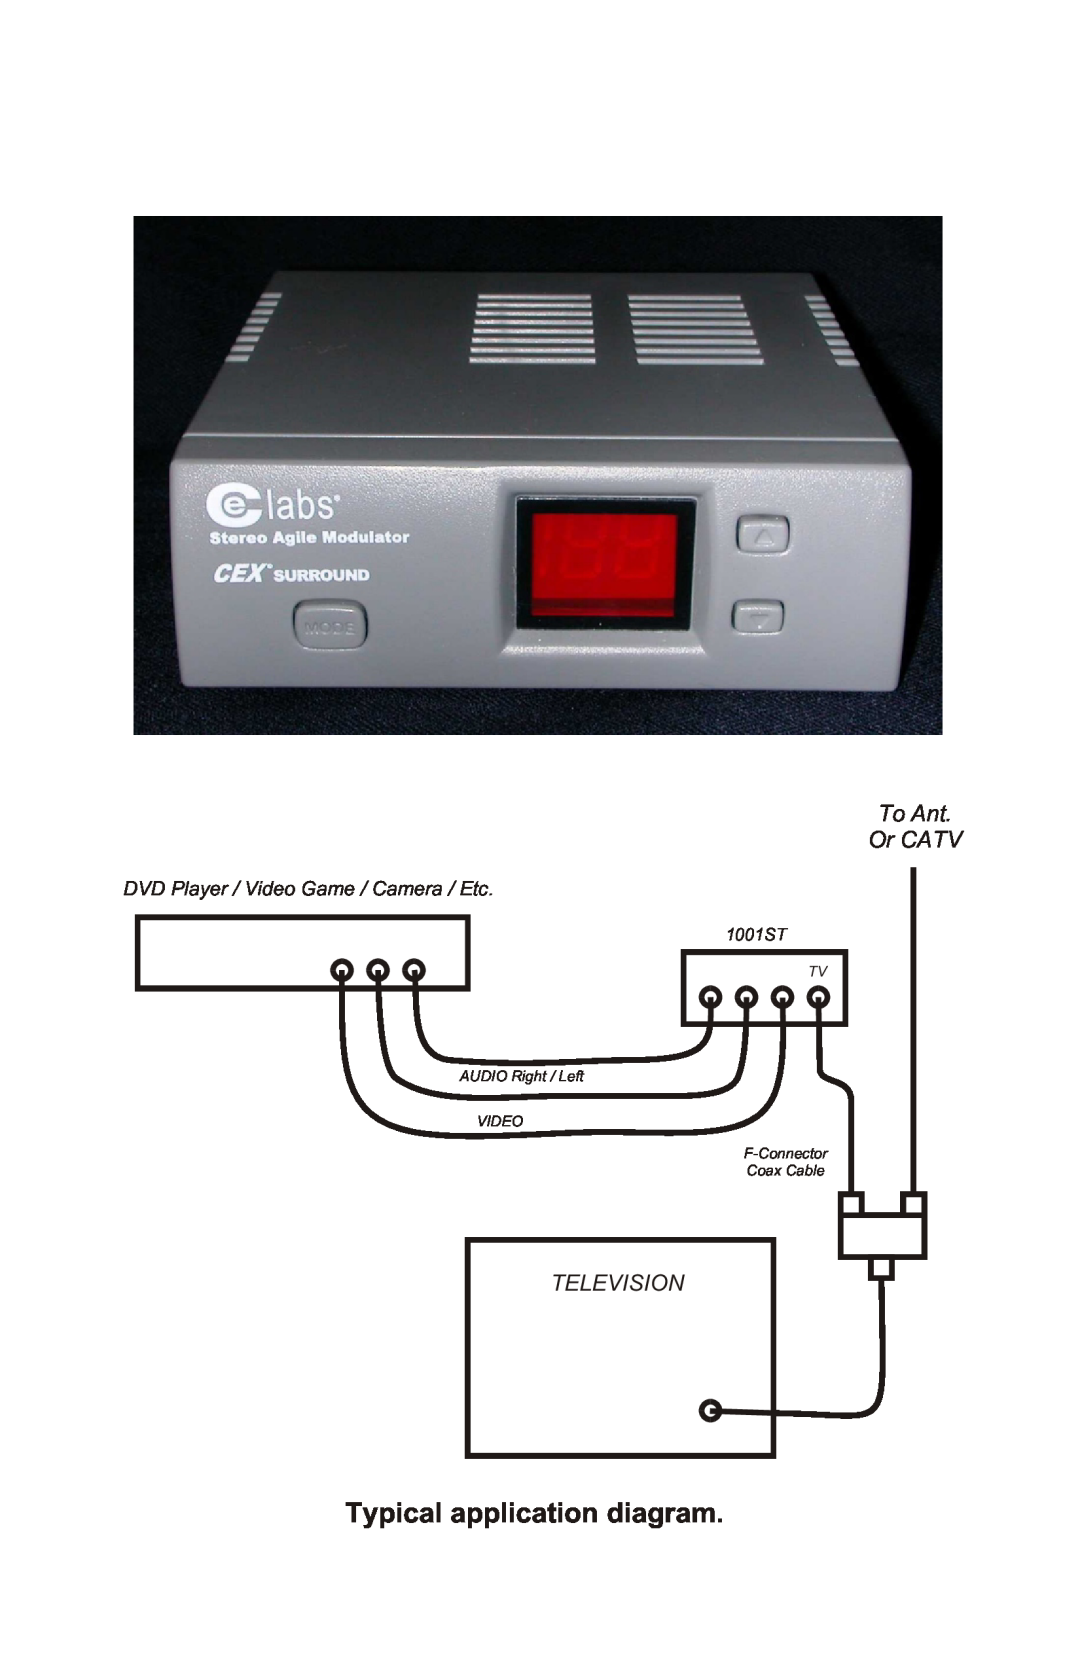 Cable Electronics 1001ST brochure Typical application diagram, DVD Player / Video Game / Camera / Etc, Coax Cable 